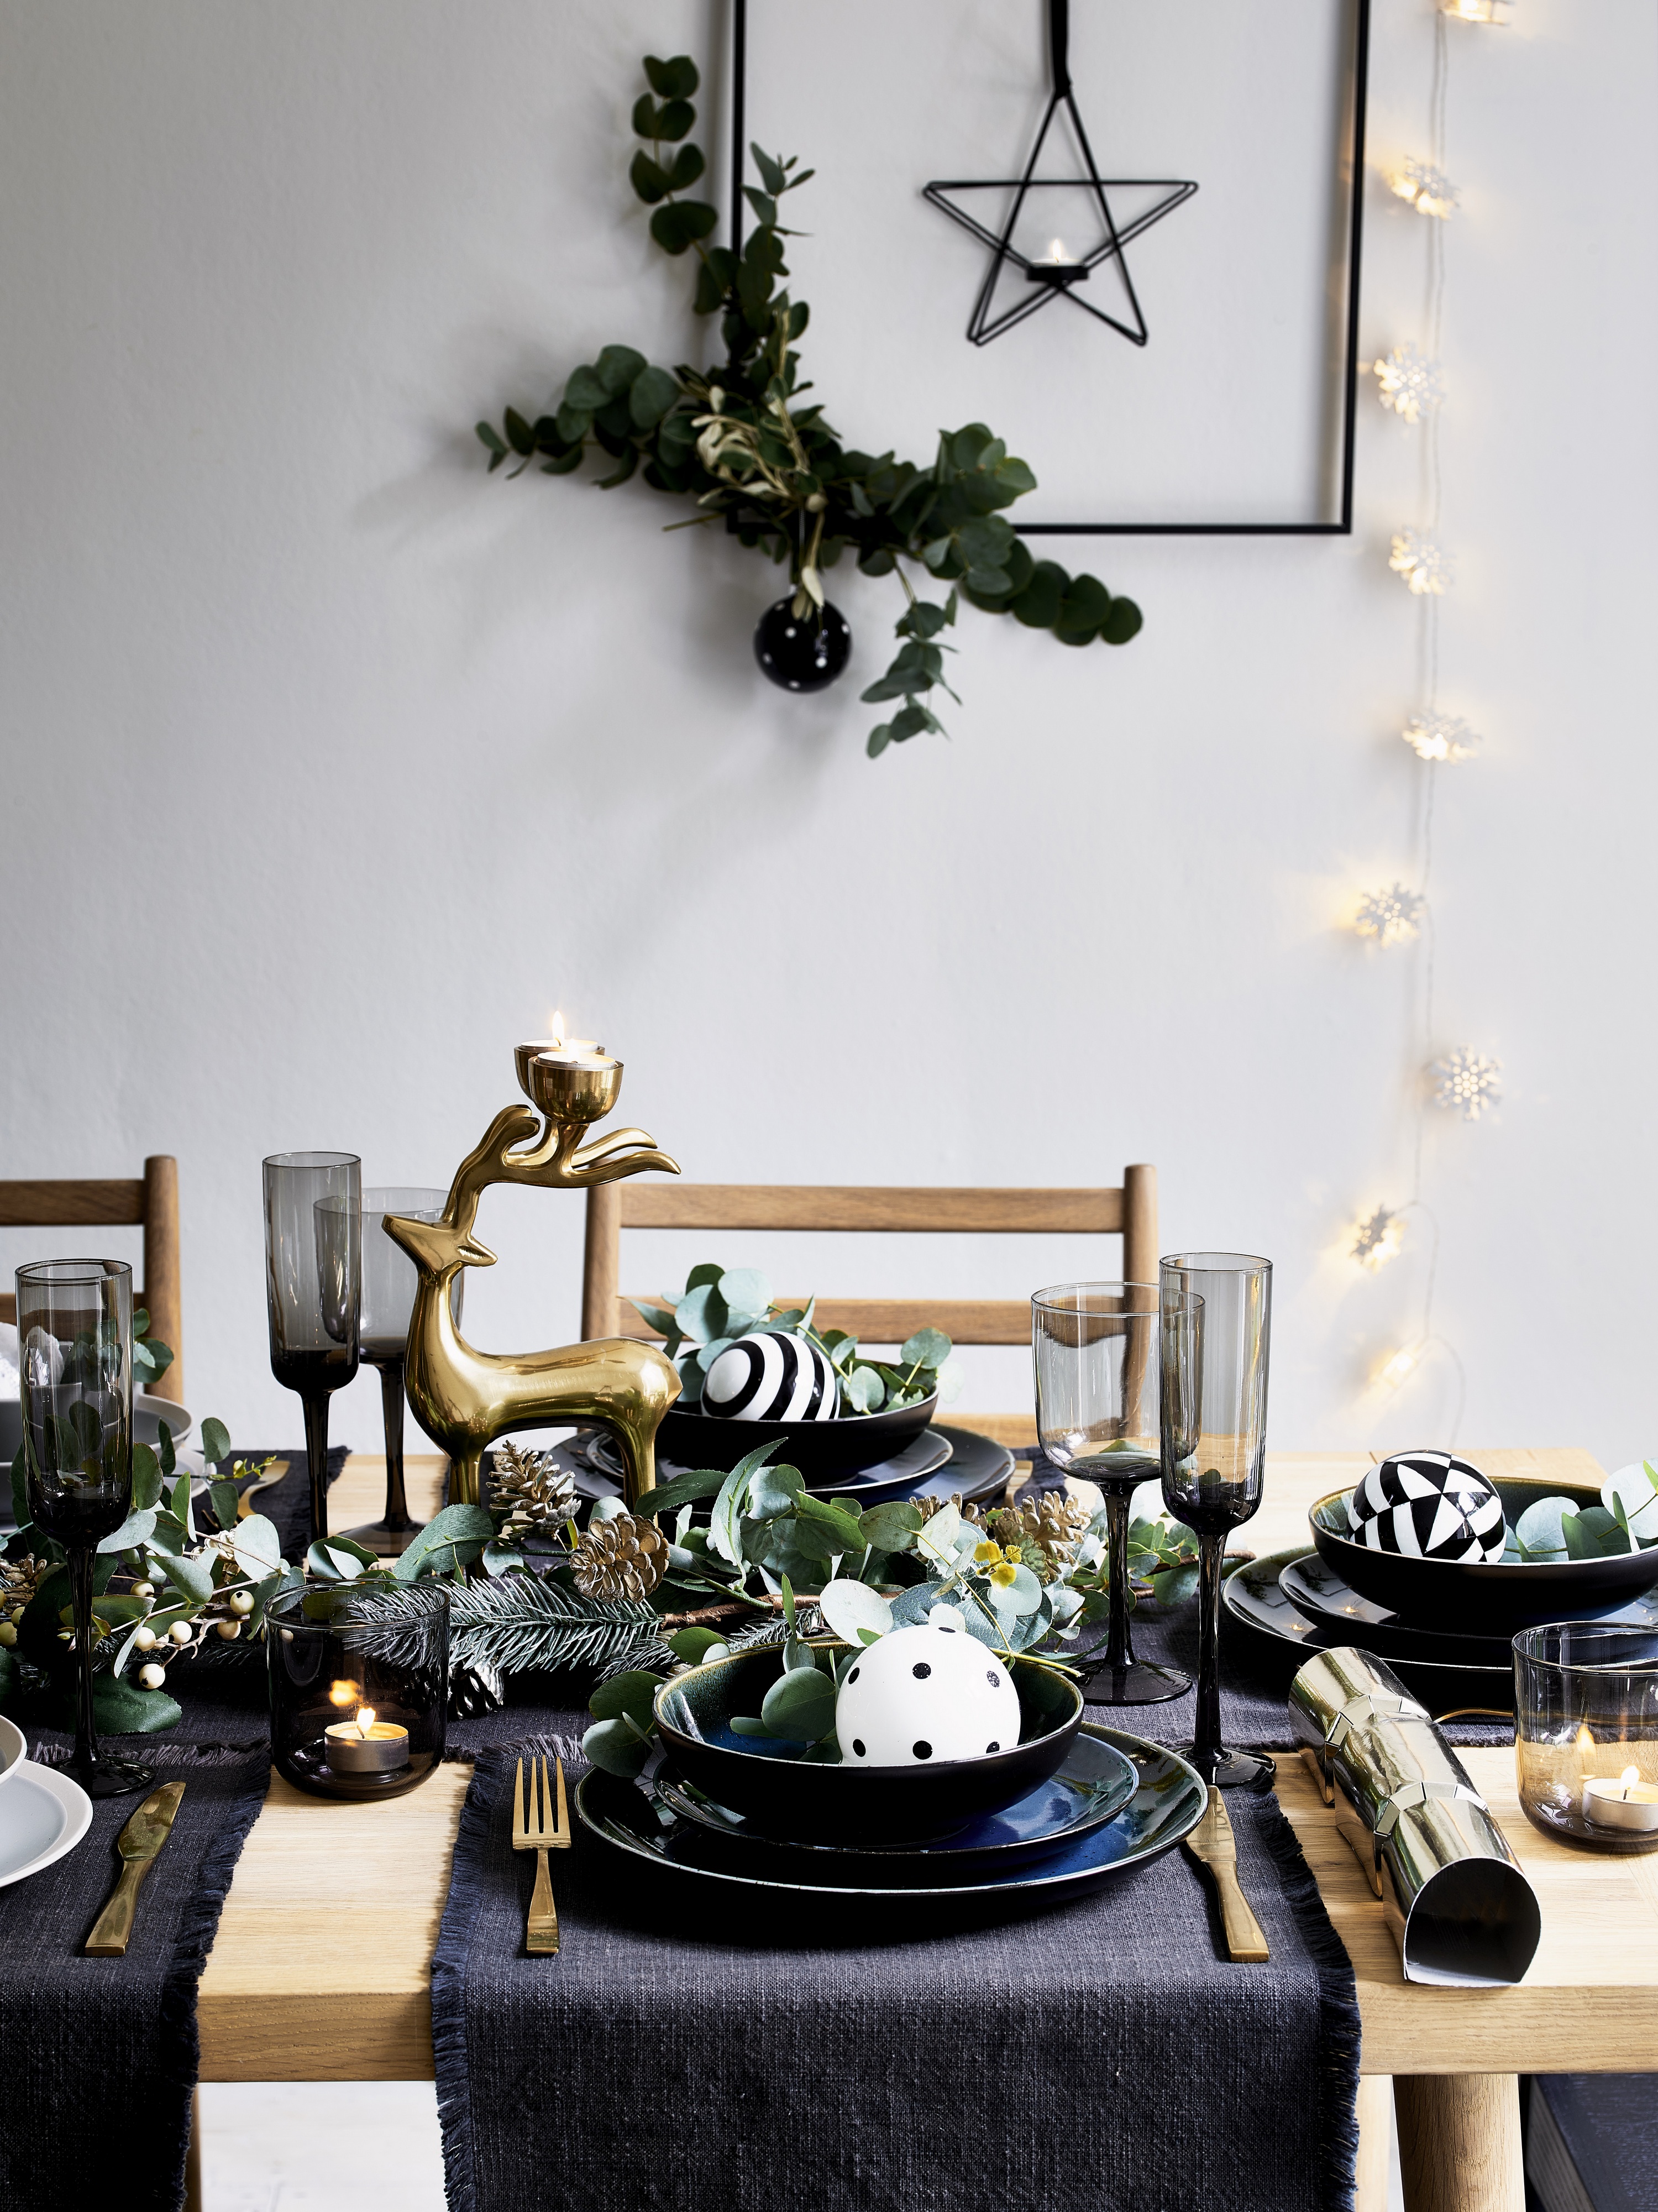 Interior Stylist & Lifestyle Blogger Maxine Brady walks you through three Christmas dining trends with styling tips to get a Pinterest-perfect dining table.